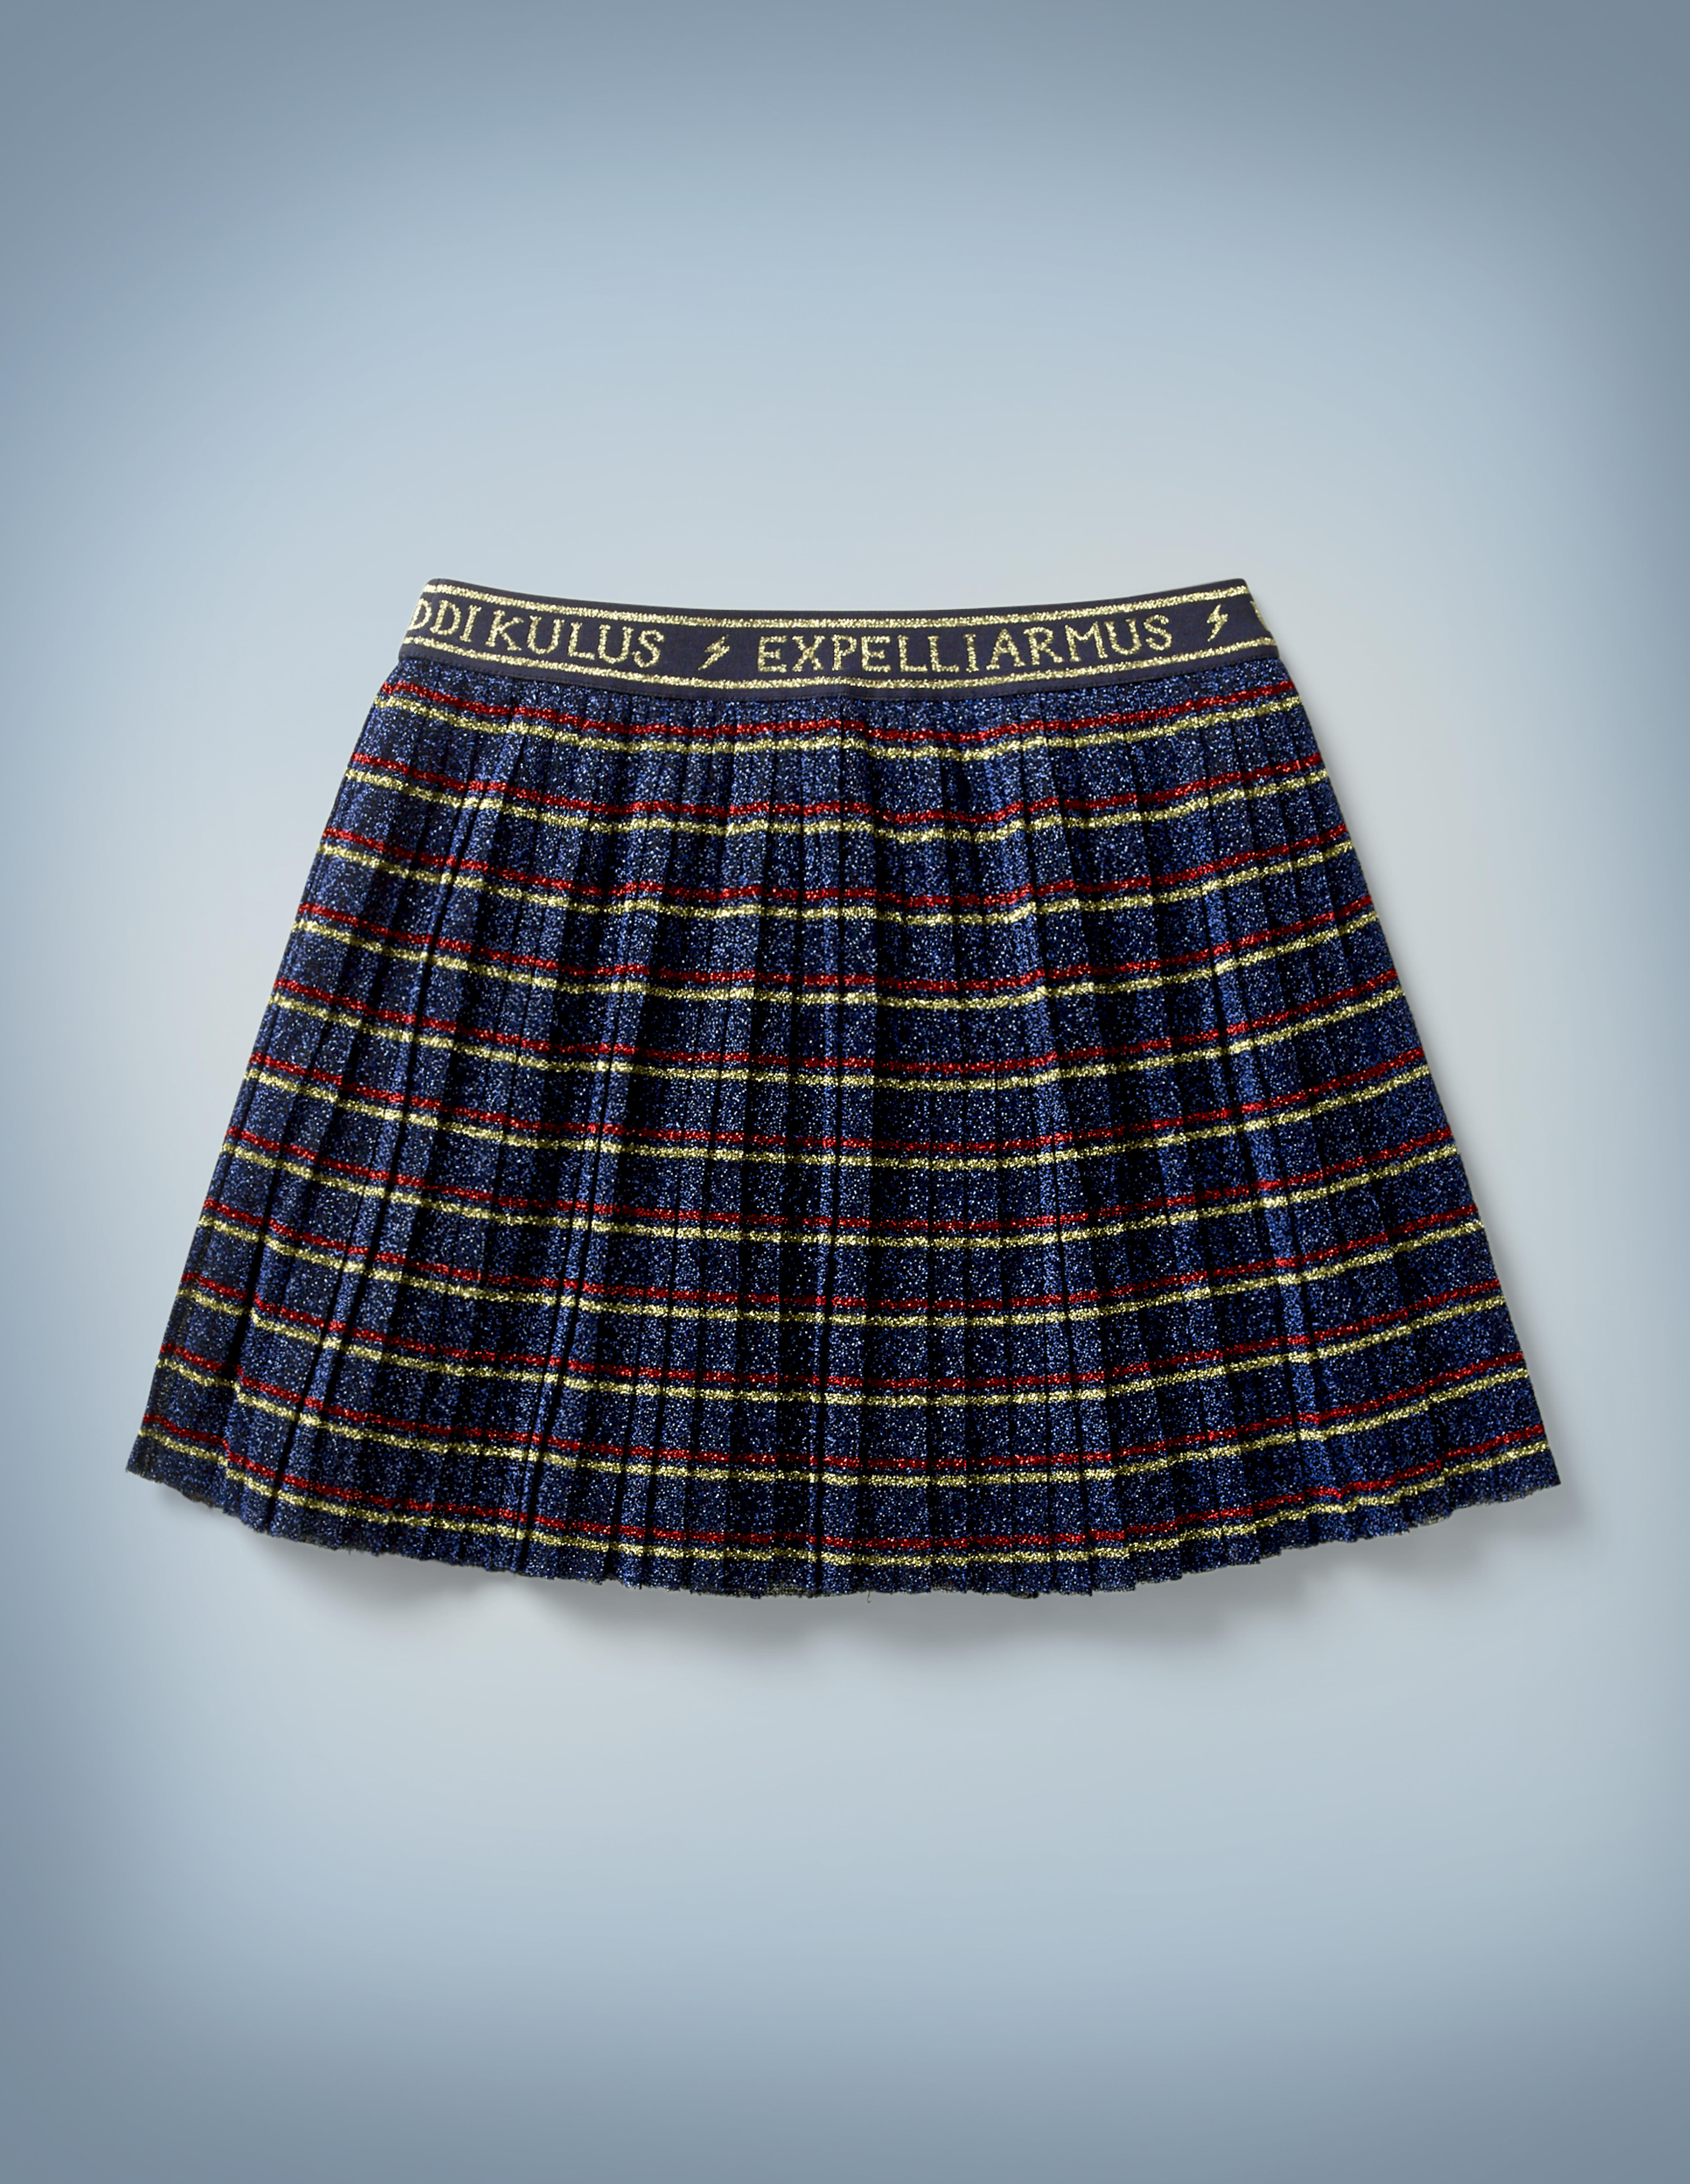 The Mini Boden Spell Skirt is navy blue with red-and-gold stripes and a waistband that features spell incantations such as “Riddikulus” and “Expelliarmus” written in gold and separated by lightning bolts. It retails at £30.